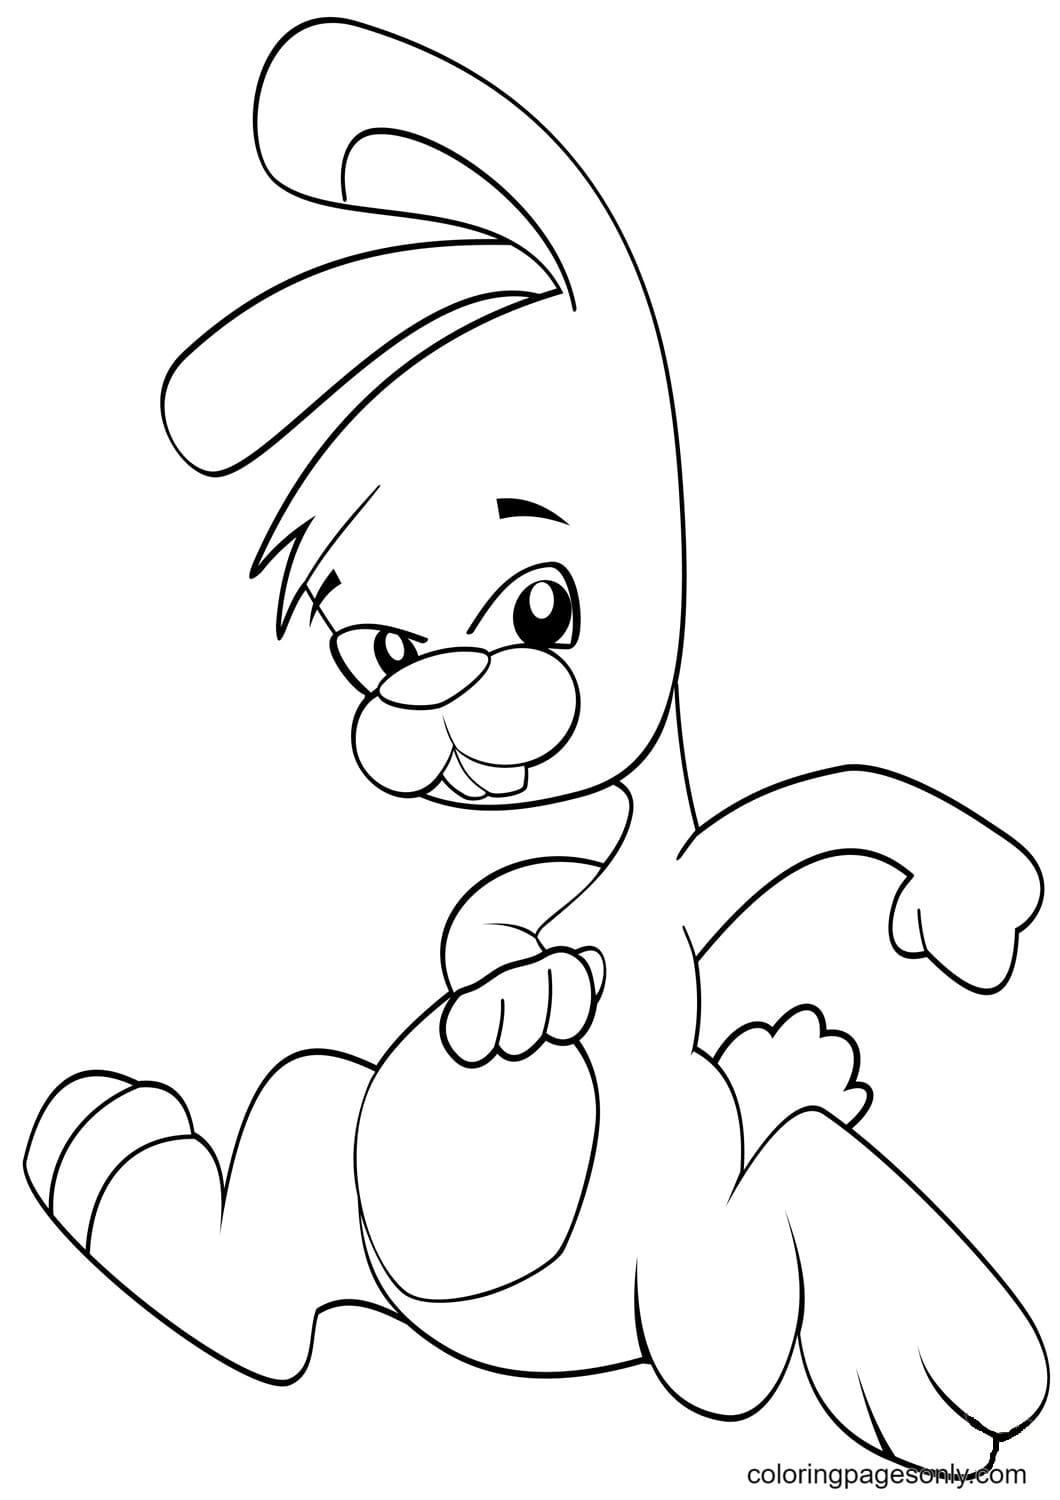 Running Bunnies Coloring Pages